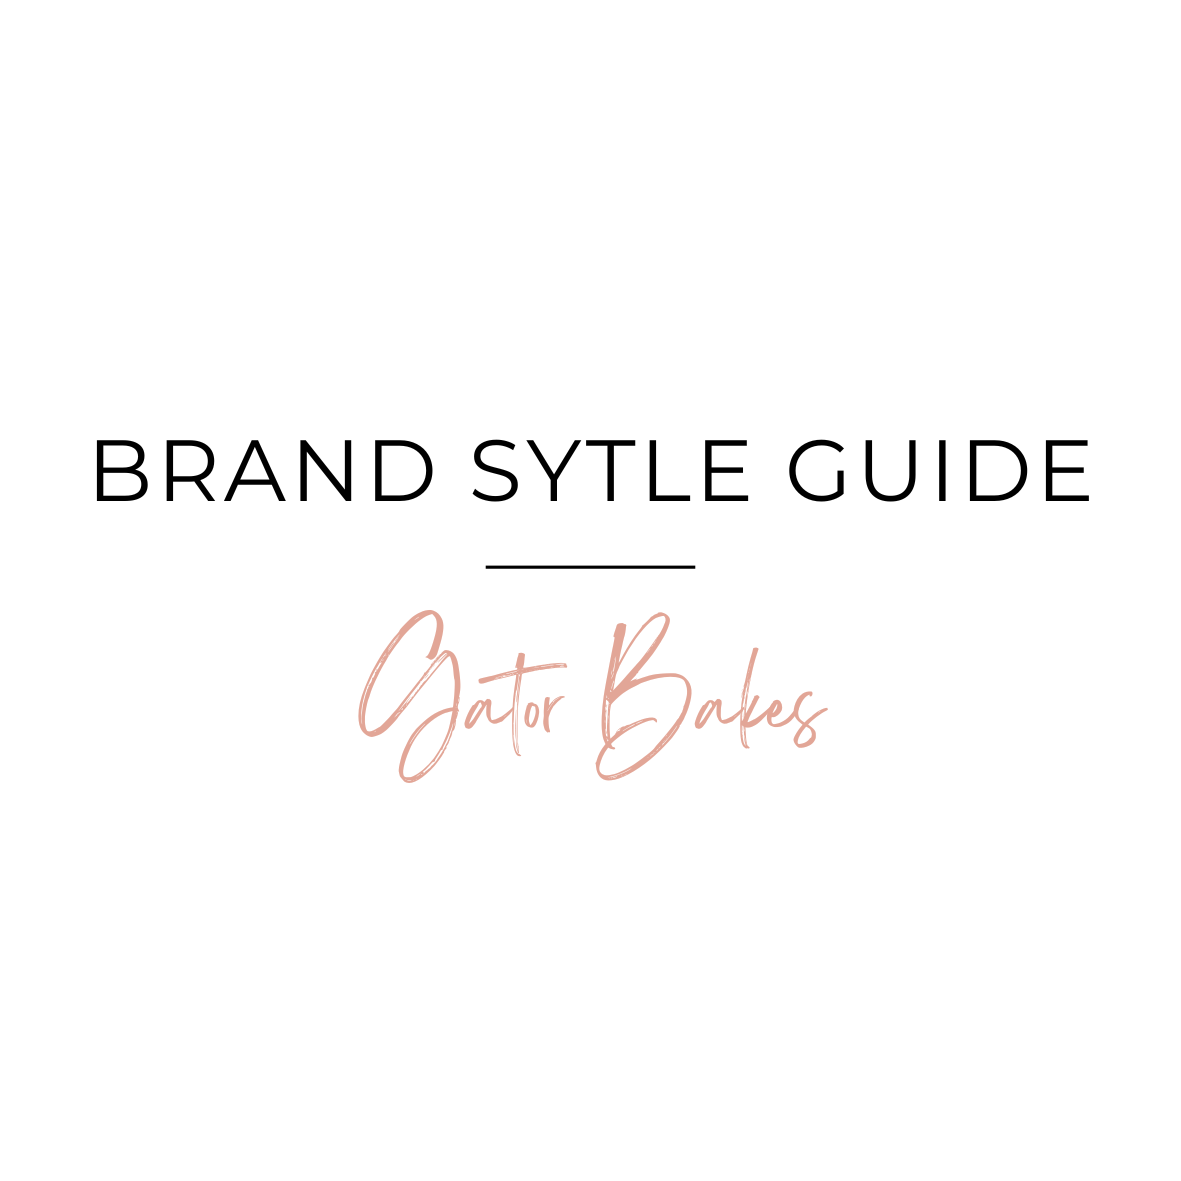 Gator Bakes Style Guide